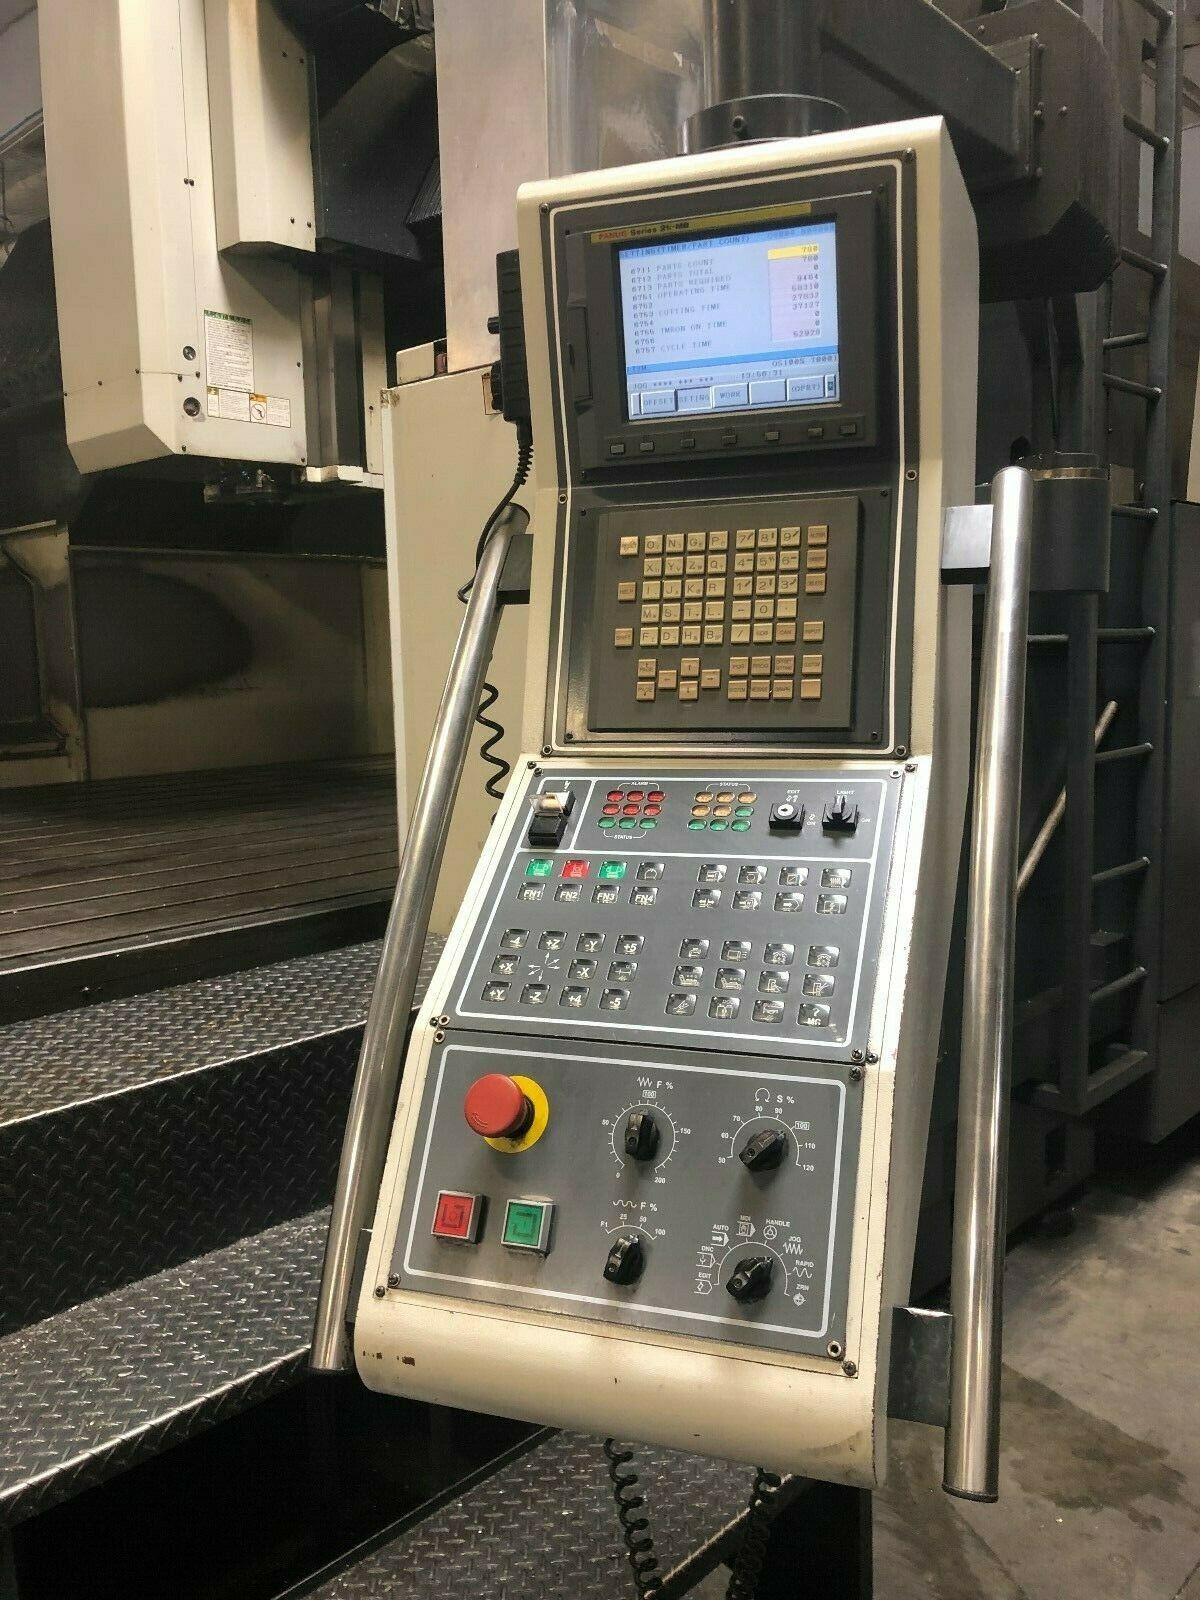 Mighty Viper PRW 5340 CNC Bridge Mill, Mighty Viper PRW CNC Vertical Machining Center used Mighty Viper Bridge Style CNC Vertical Machining Center for sale, large CNC Bridge Mill For Sale